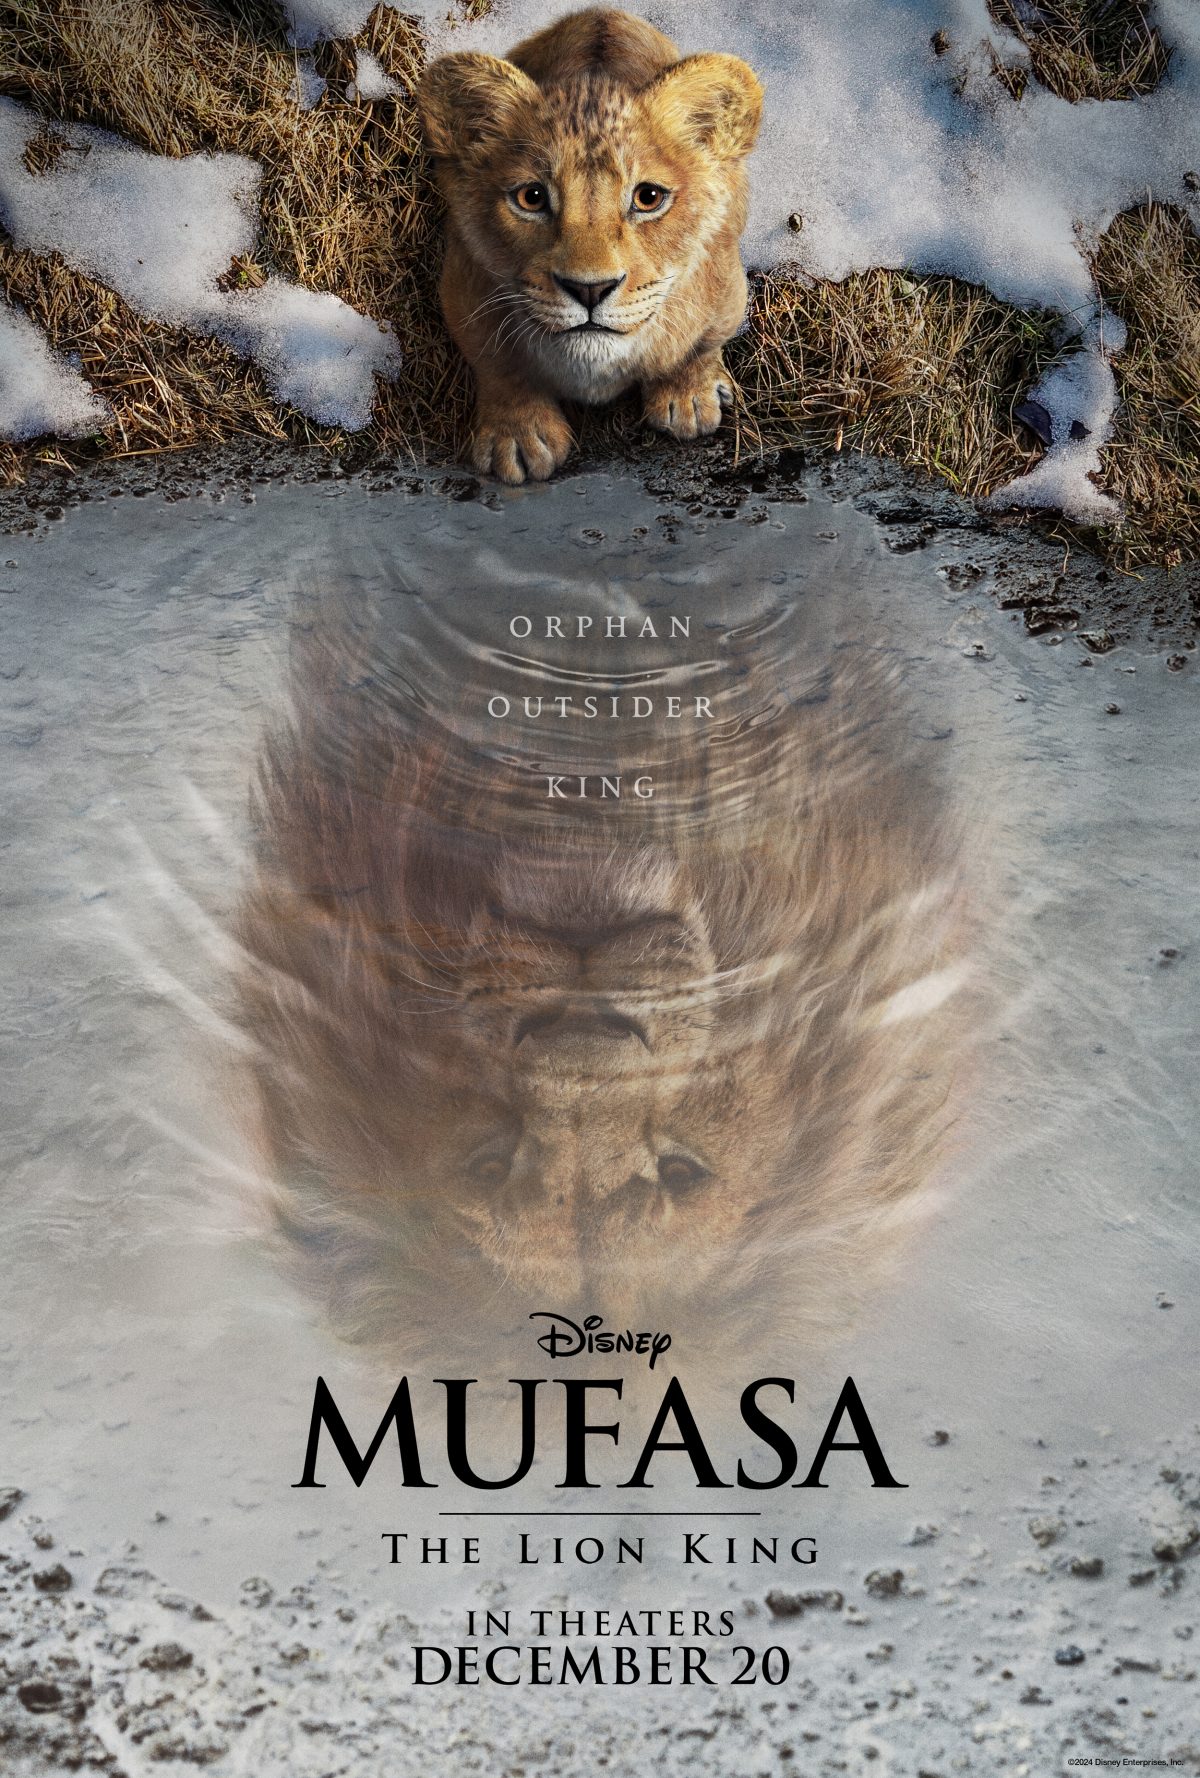 Disney Debuts First Teaser Trailer for 'Mufasa: The Lion King' - The ...